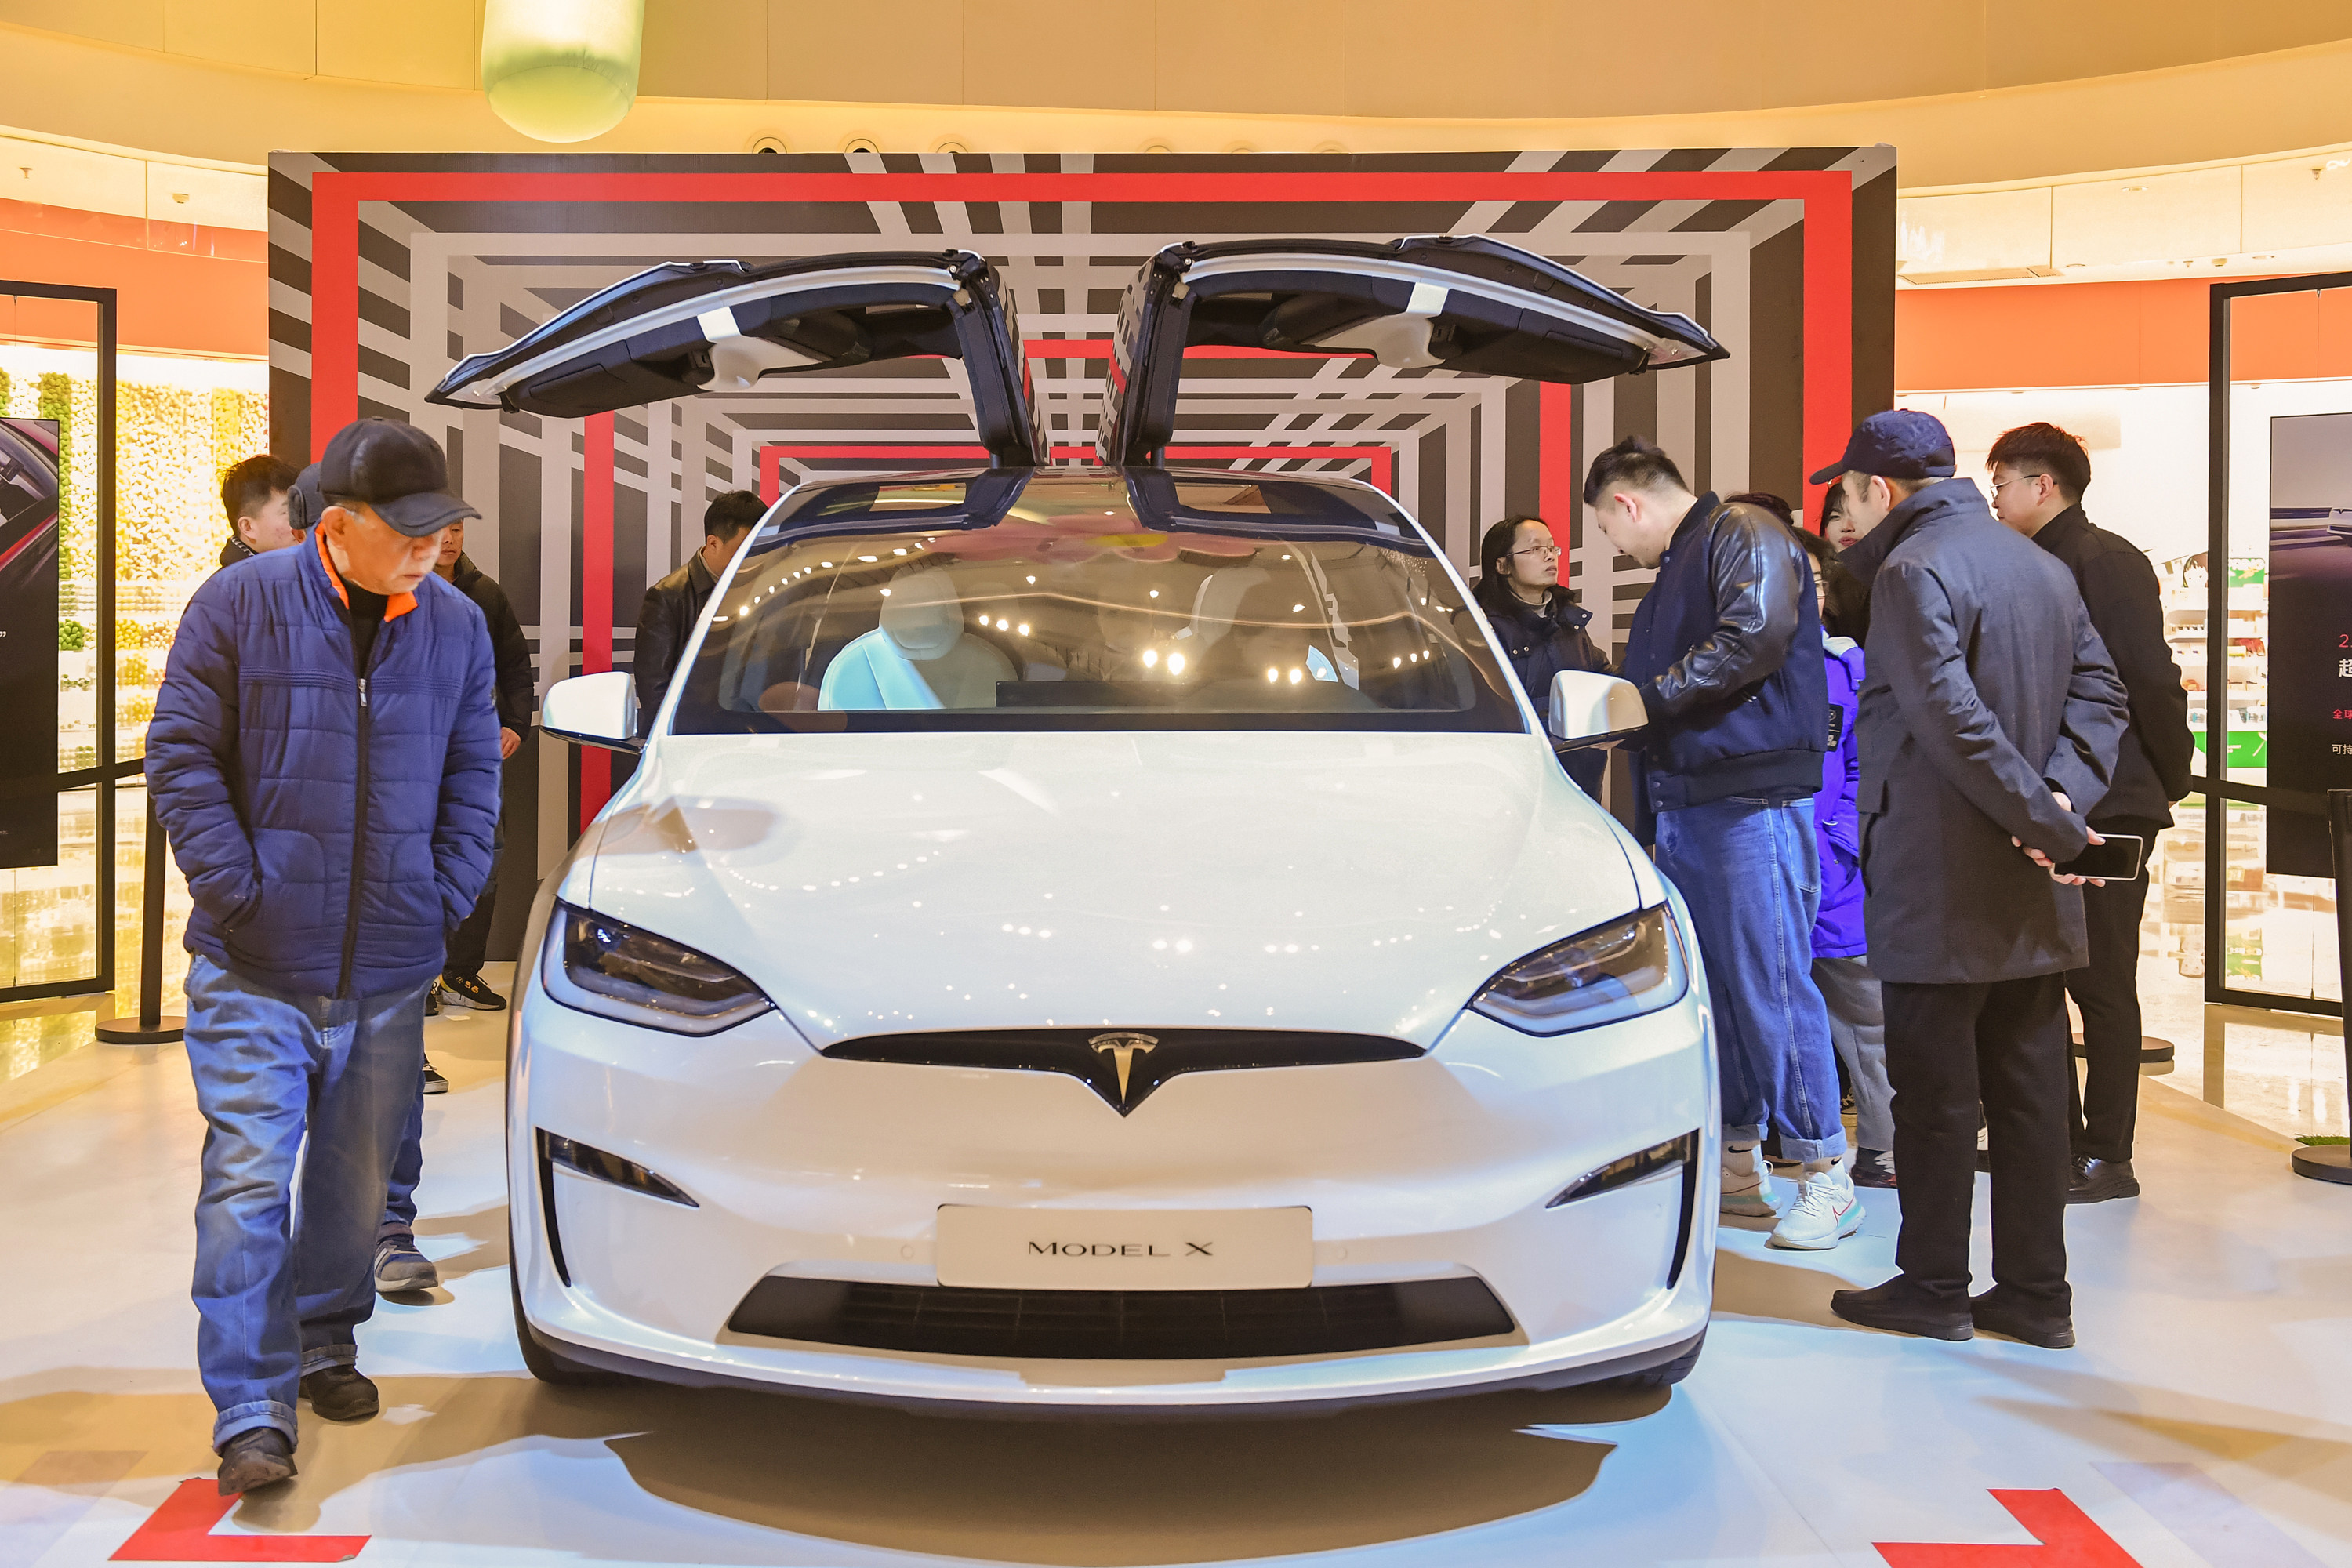 Consumers look at the Tesla Model X Plaid car at Vanke Mall on February 26, 2023 in Hefei, Anhui Province of China. Photo: Getty Images